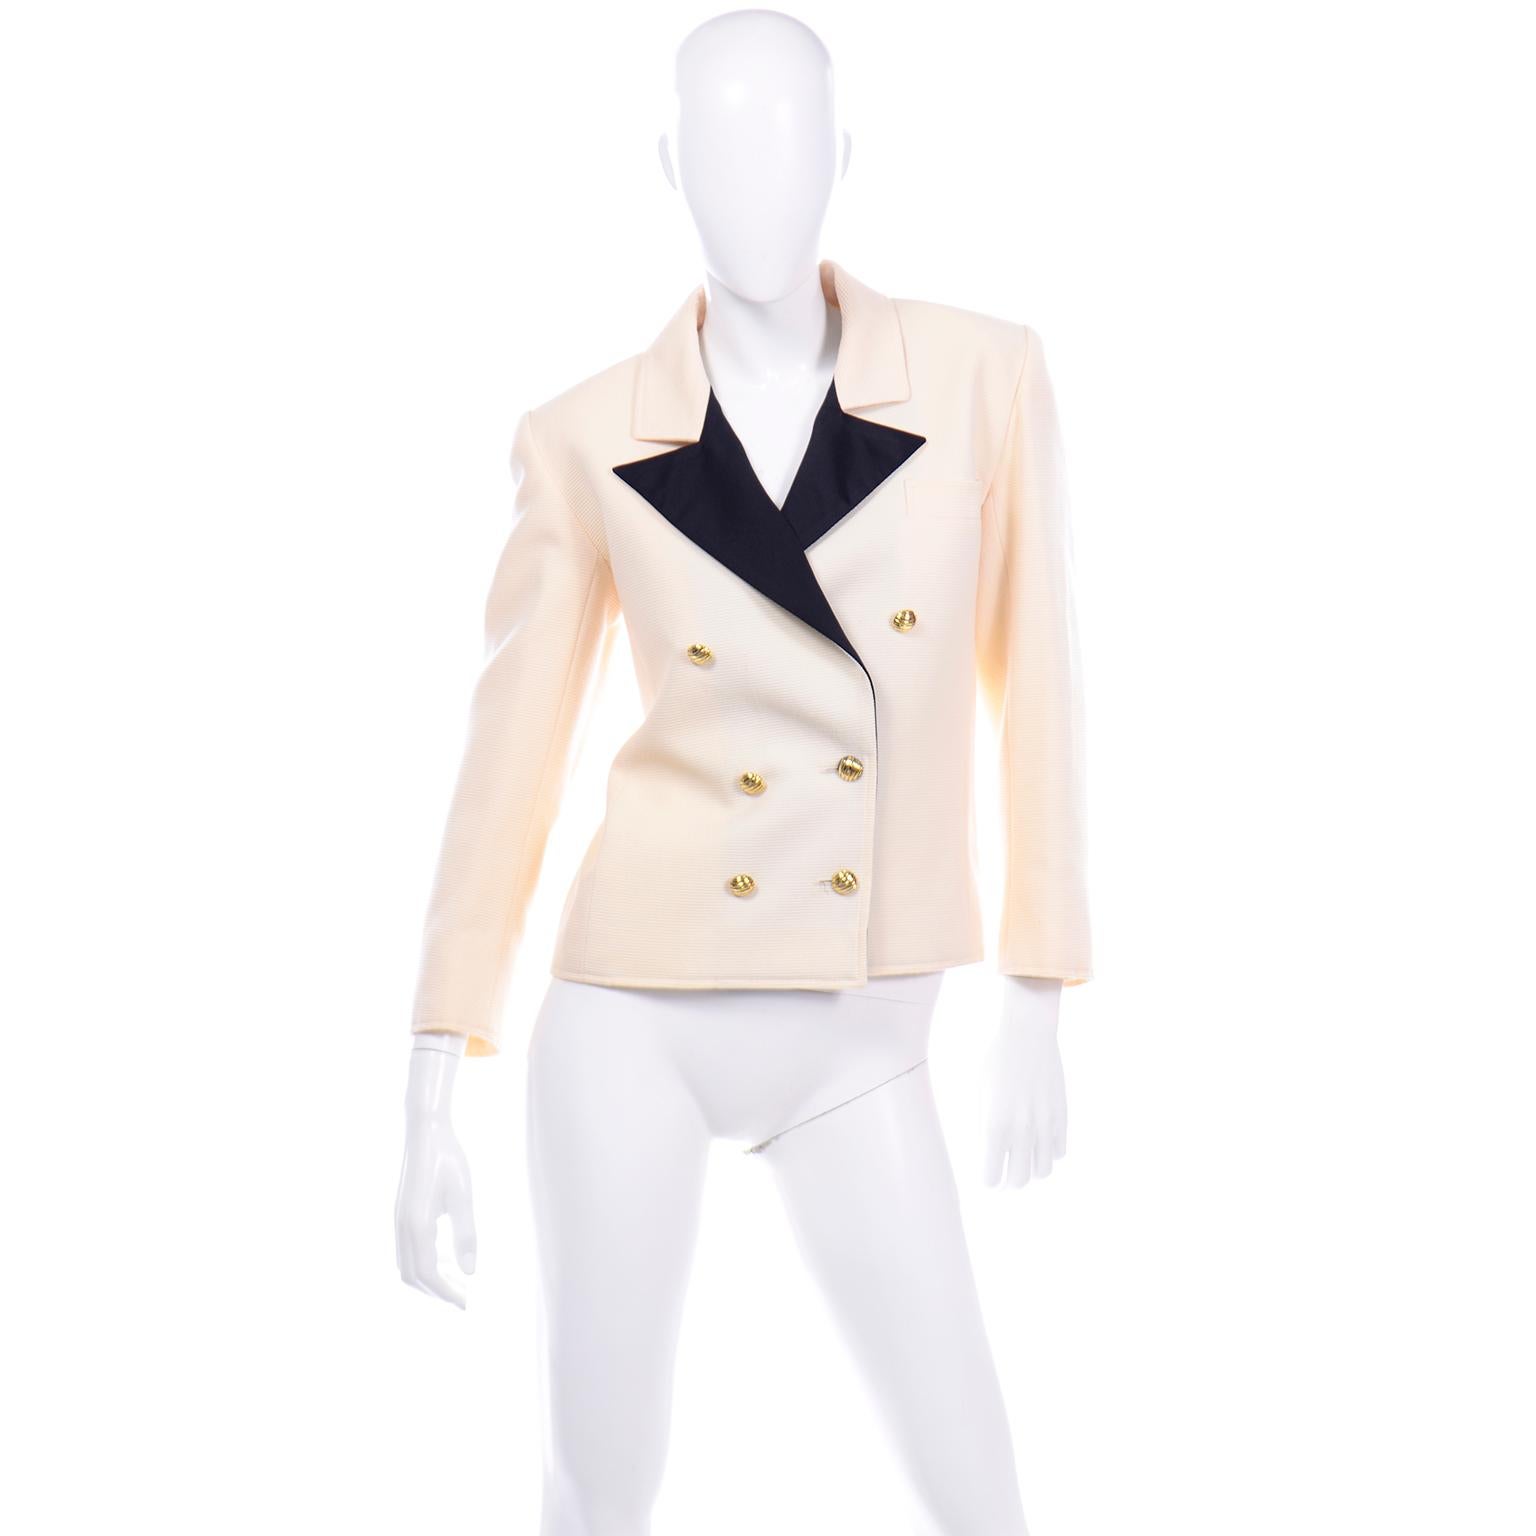 This fabulous vintage Yves Saint Laurent double breasted ribbed wool blazer jacket is in a beautiful cream color with black satin silk lapels. There are nice, heavy gold tone metal ribbed buttons in the front and on the sleeves. The shoulders are